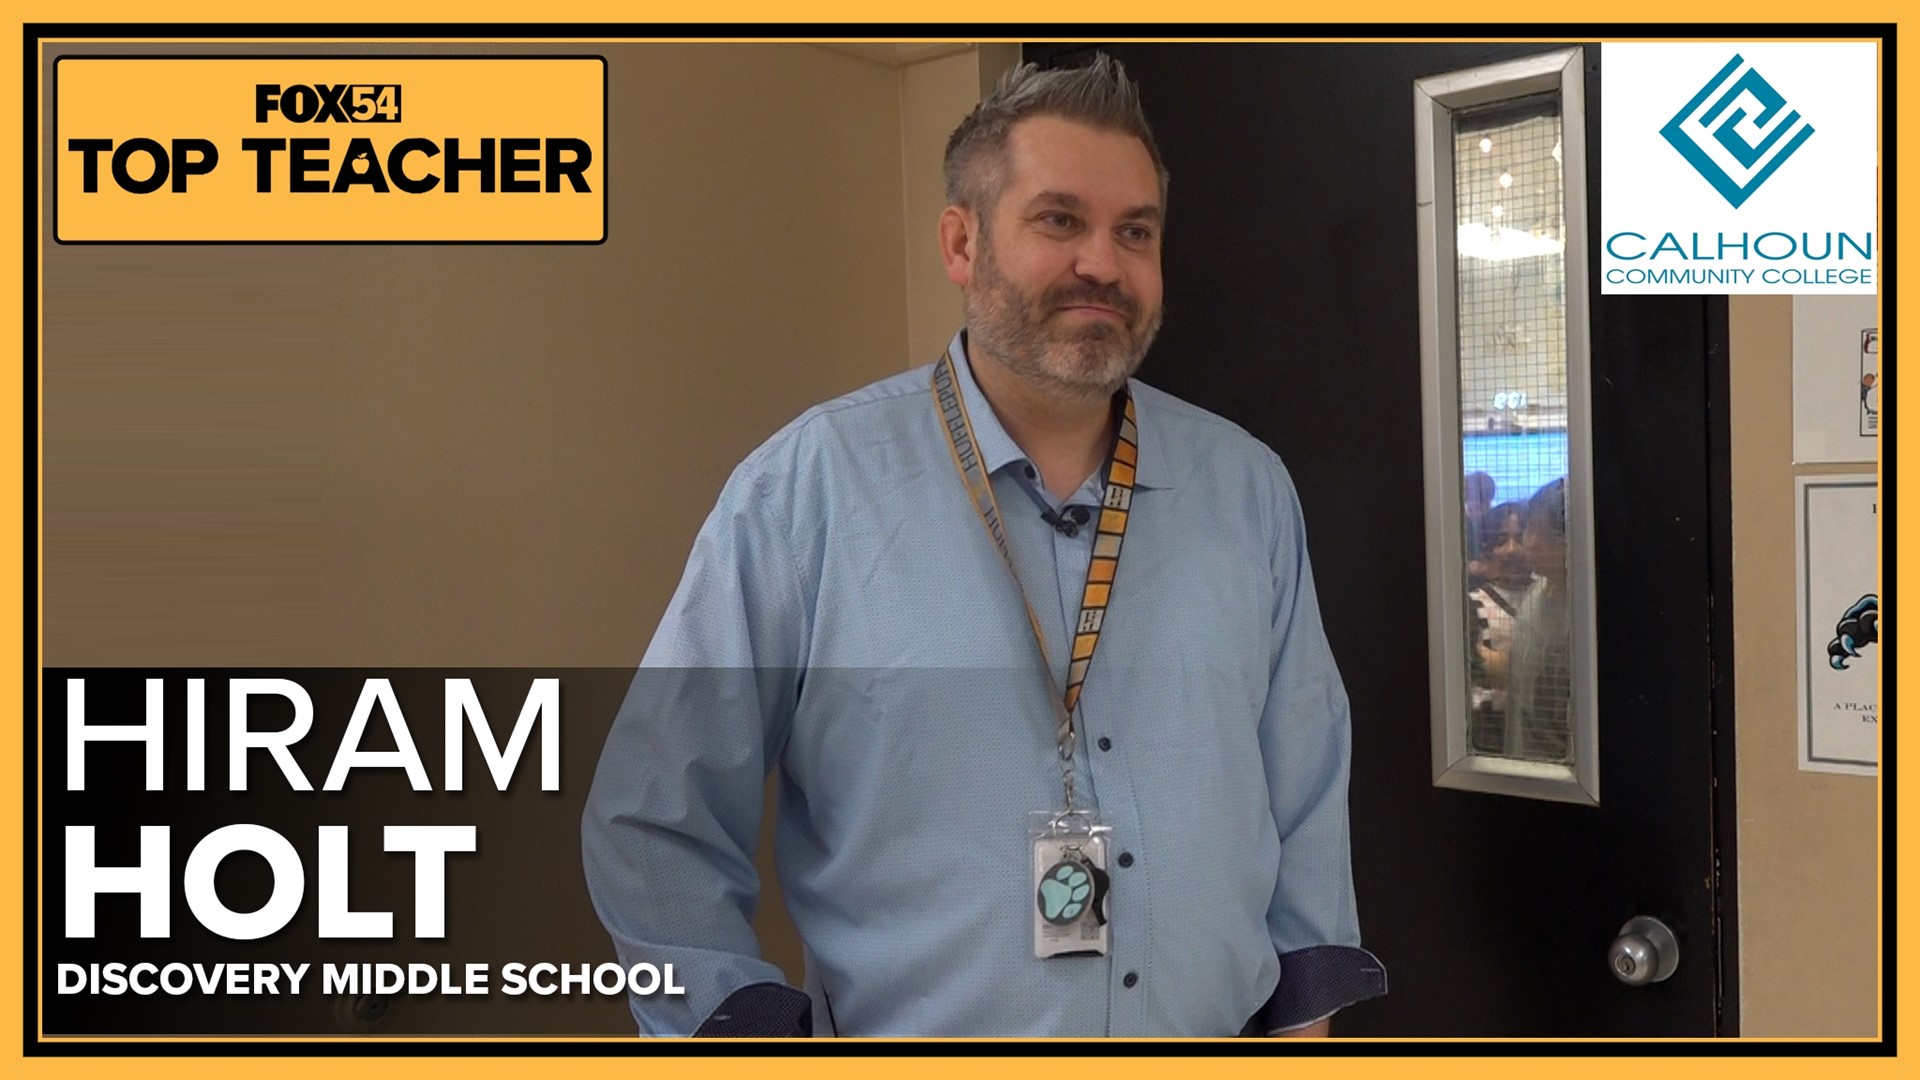 Hiram Holt has been teaching for three years at Discovery Middle School.